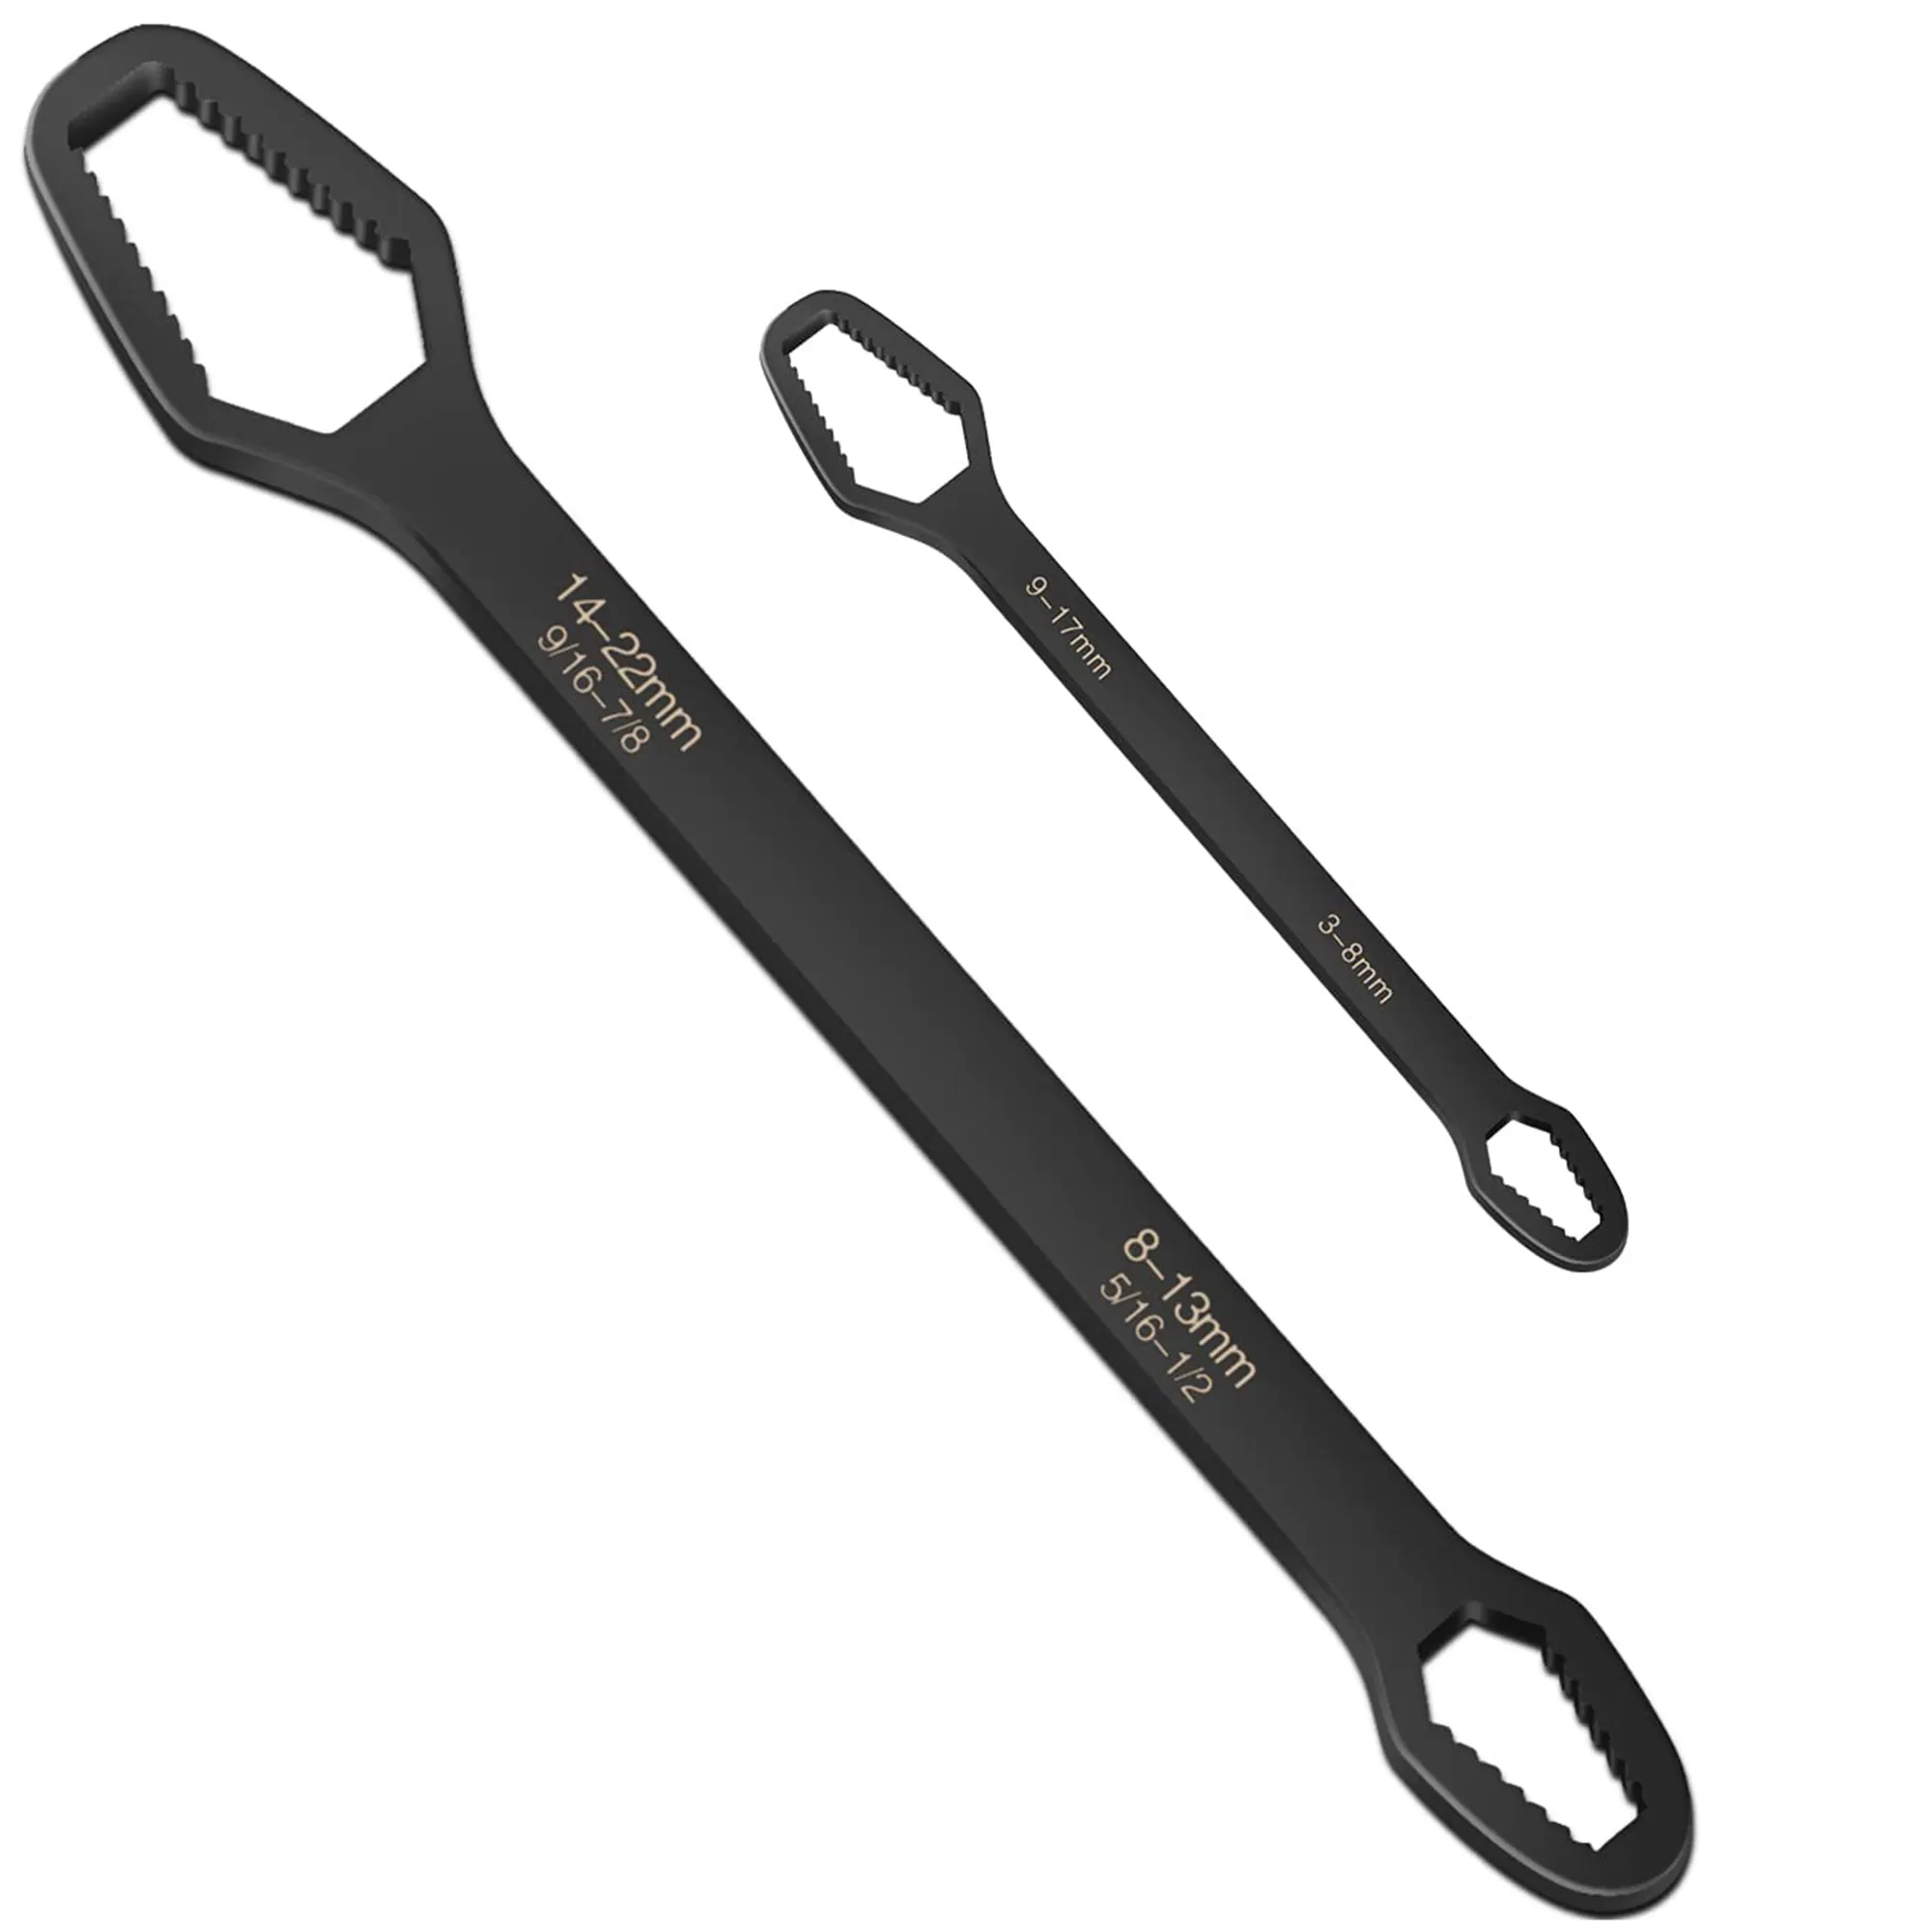 Universal Wrench, 3-17mm & 8-22mm Universal Torx Wrench, Double-ended Self-tightening Adjustable